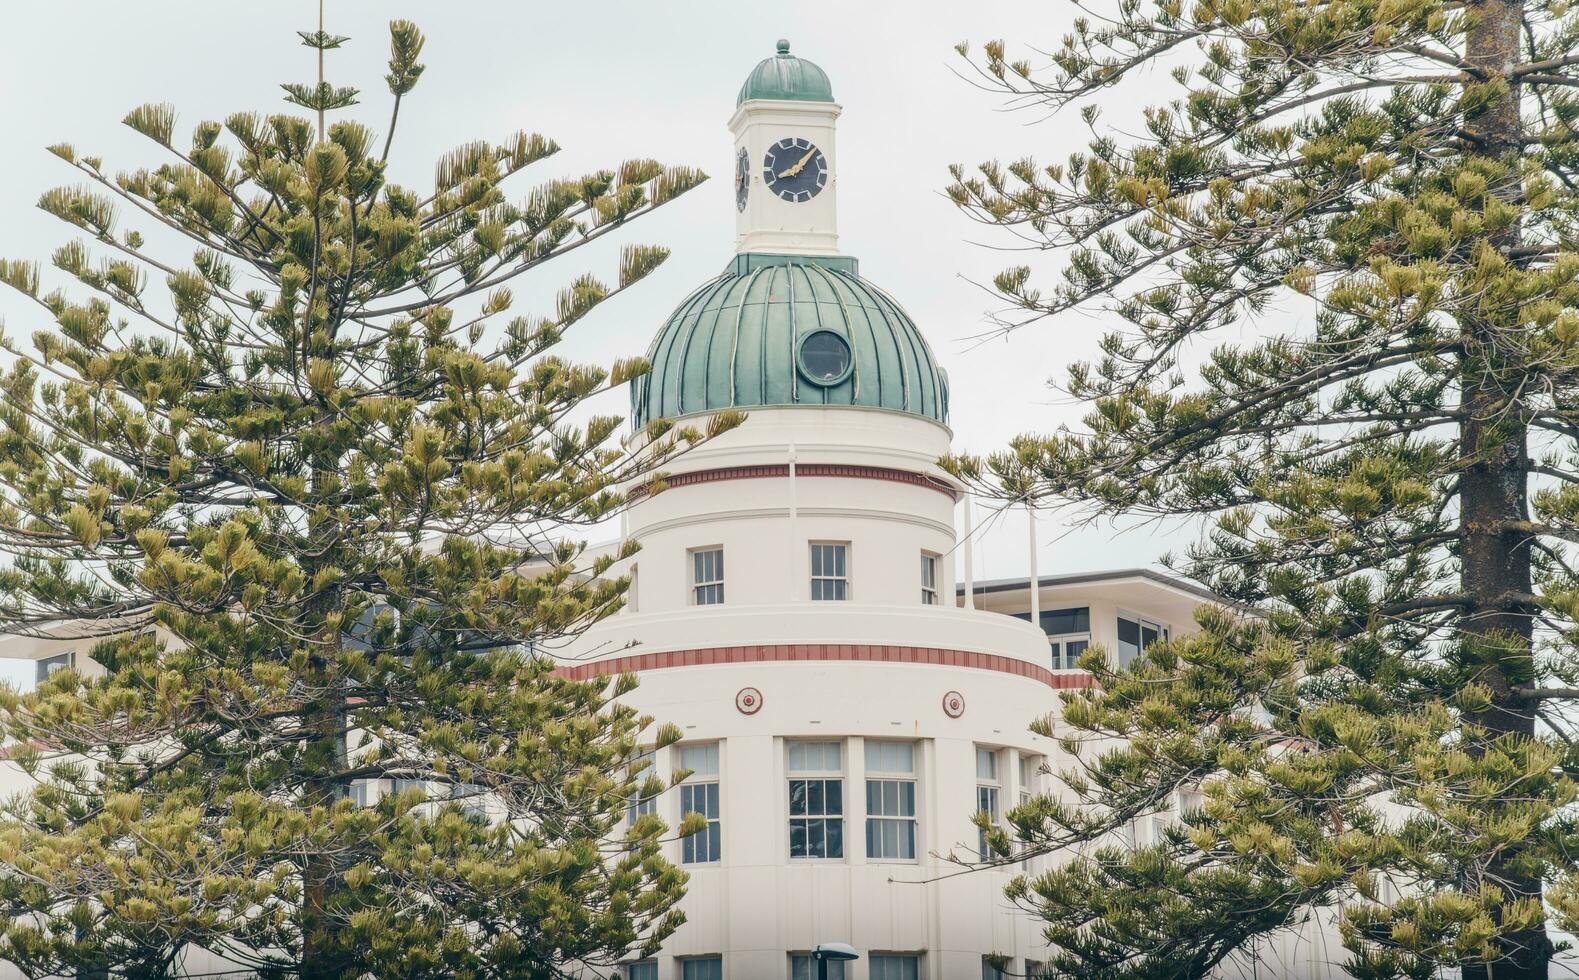 The T and G building an iconic art deco landmark building in Napier town, New Zealand. photo